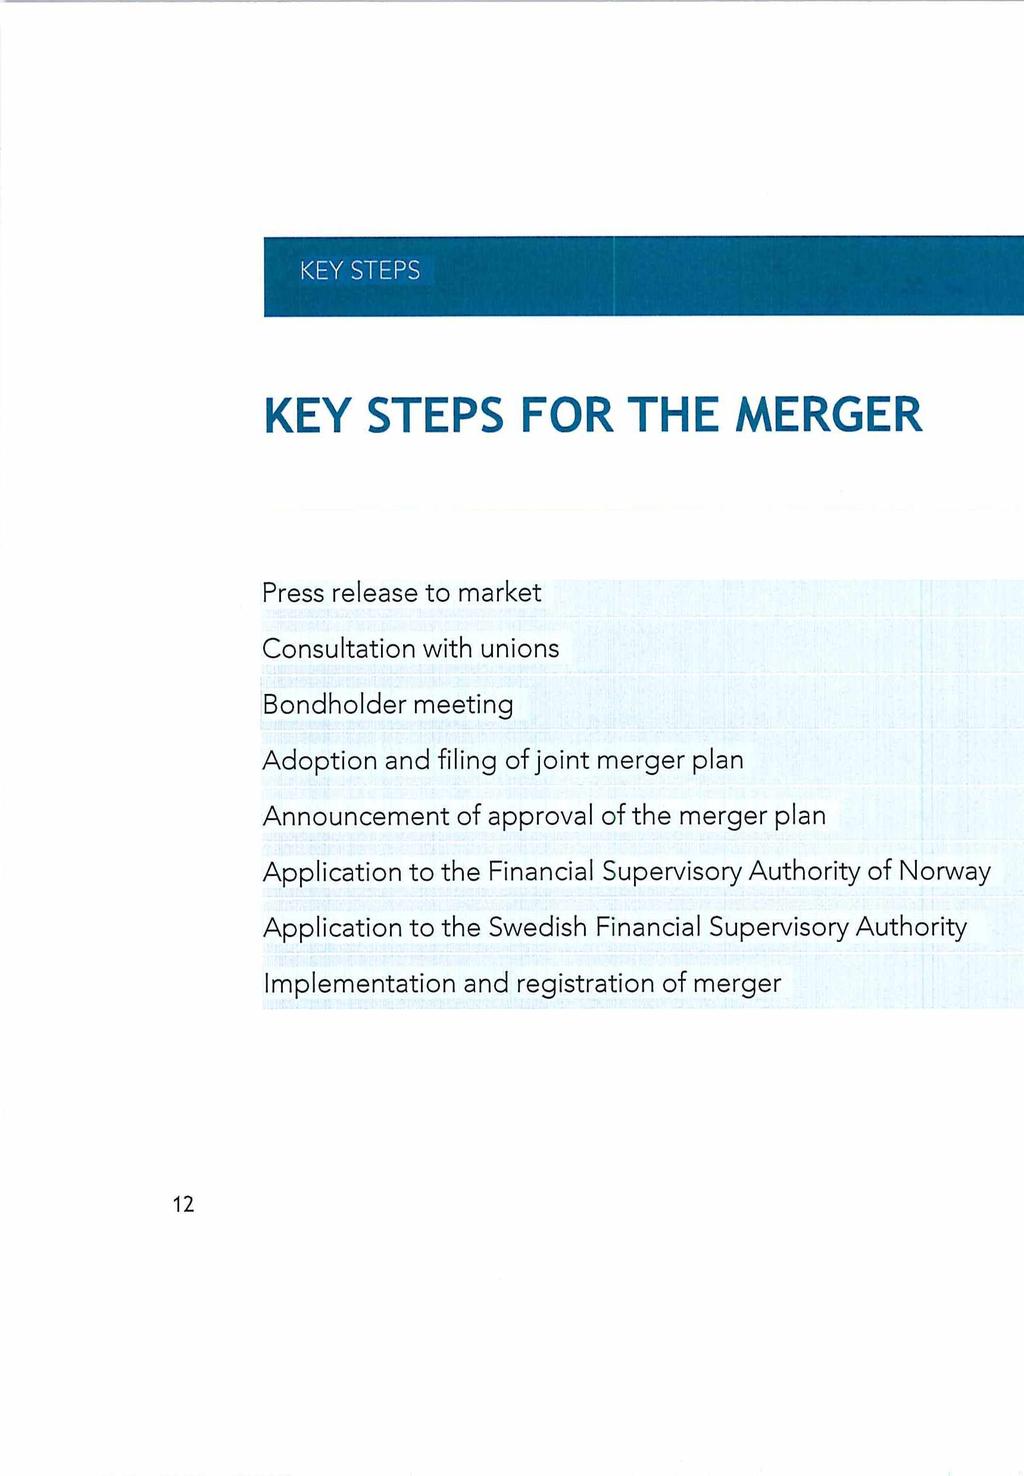 KEY STEPS KEY STEPS FOR THE MERGER Press release to market Consultation with unions Bondholder meeting Adoption and filing of joint merger plan Announcement of approval of the